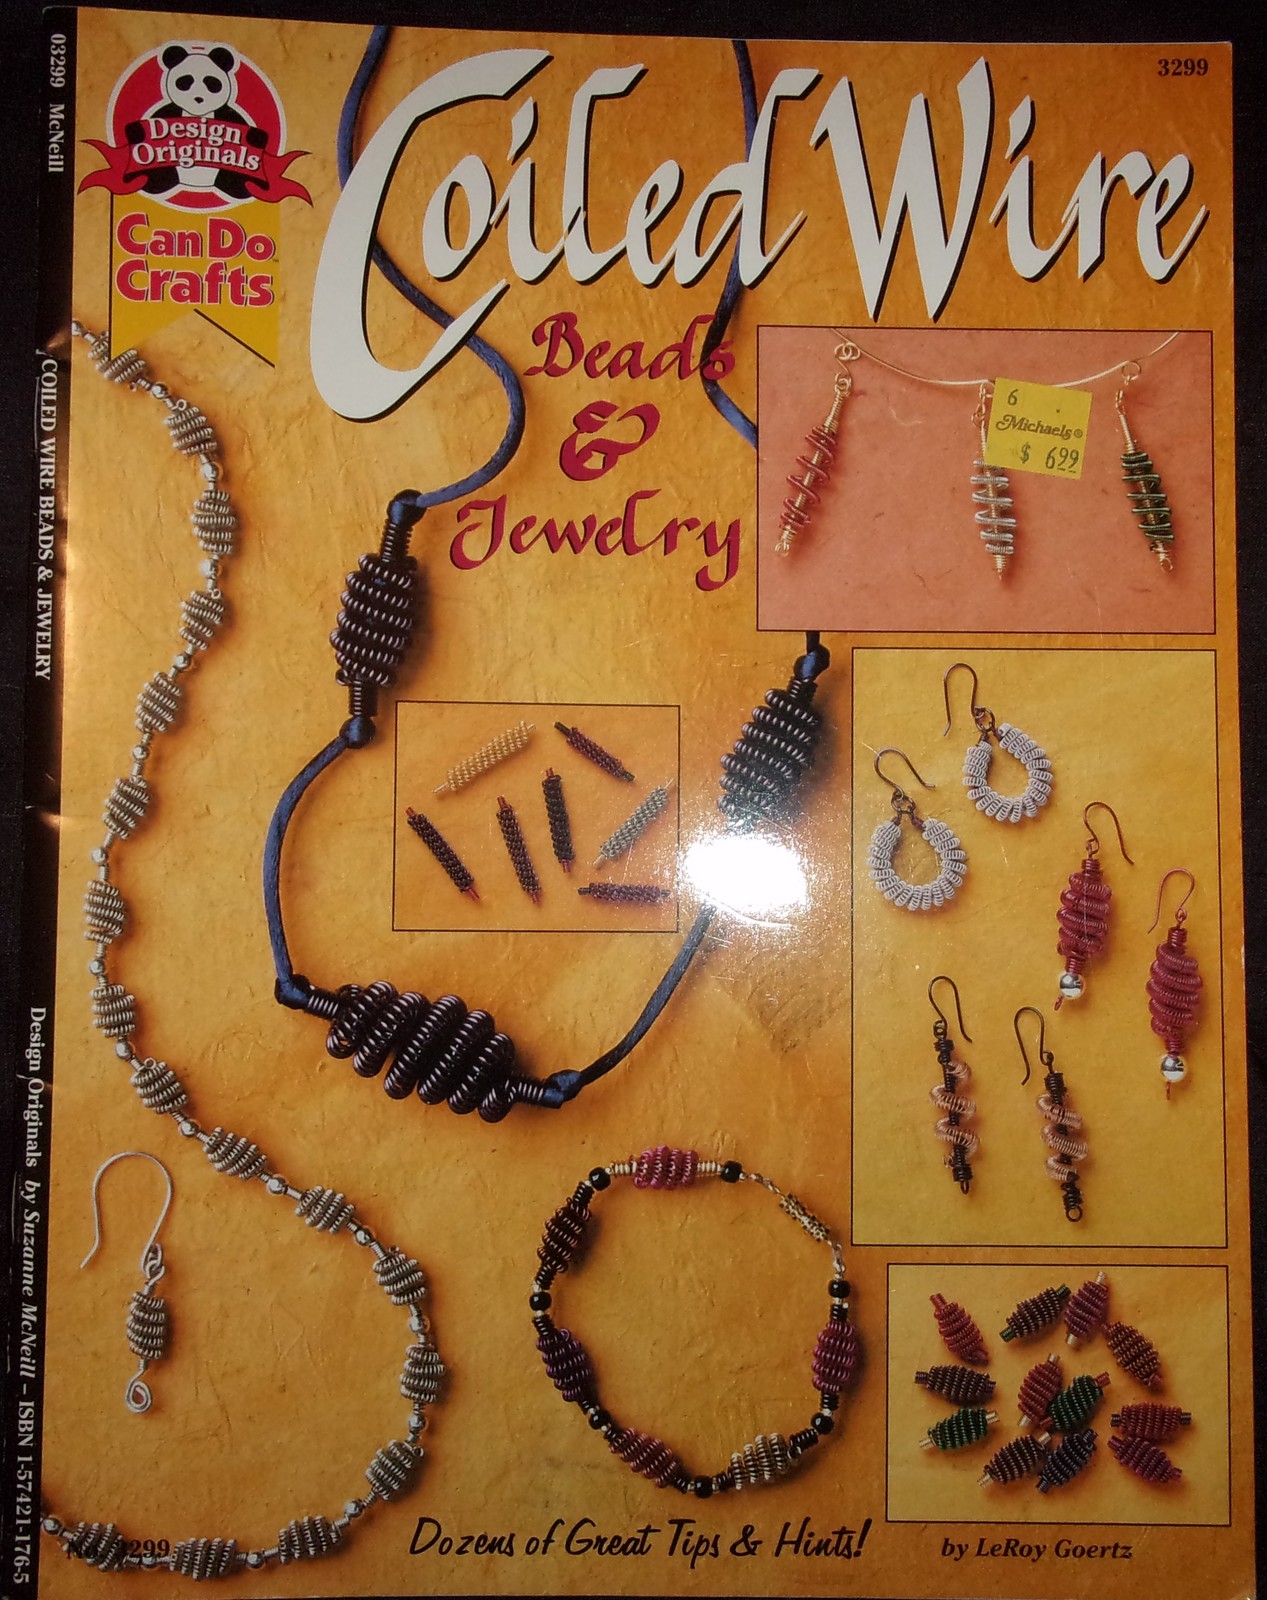 DESIGN ORIGINALS   COILED WIRE BEADS & JEWELRY BOOK  BY LEROY GOERTZ - $4.99